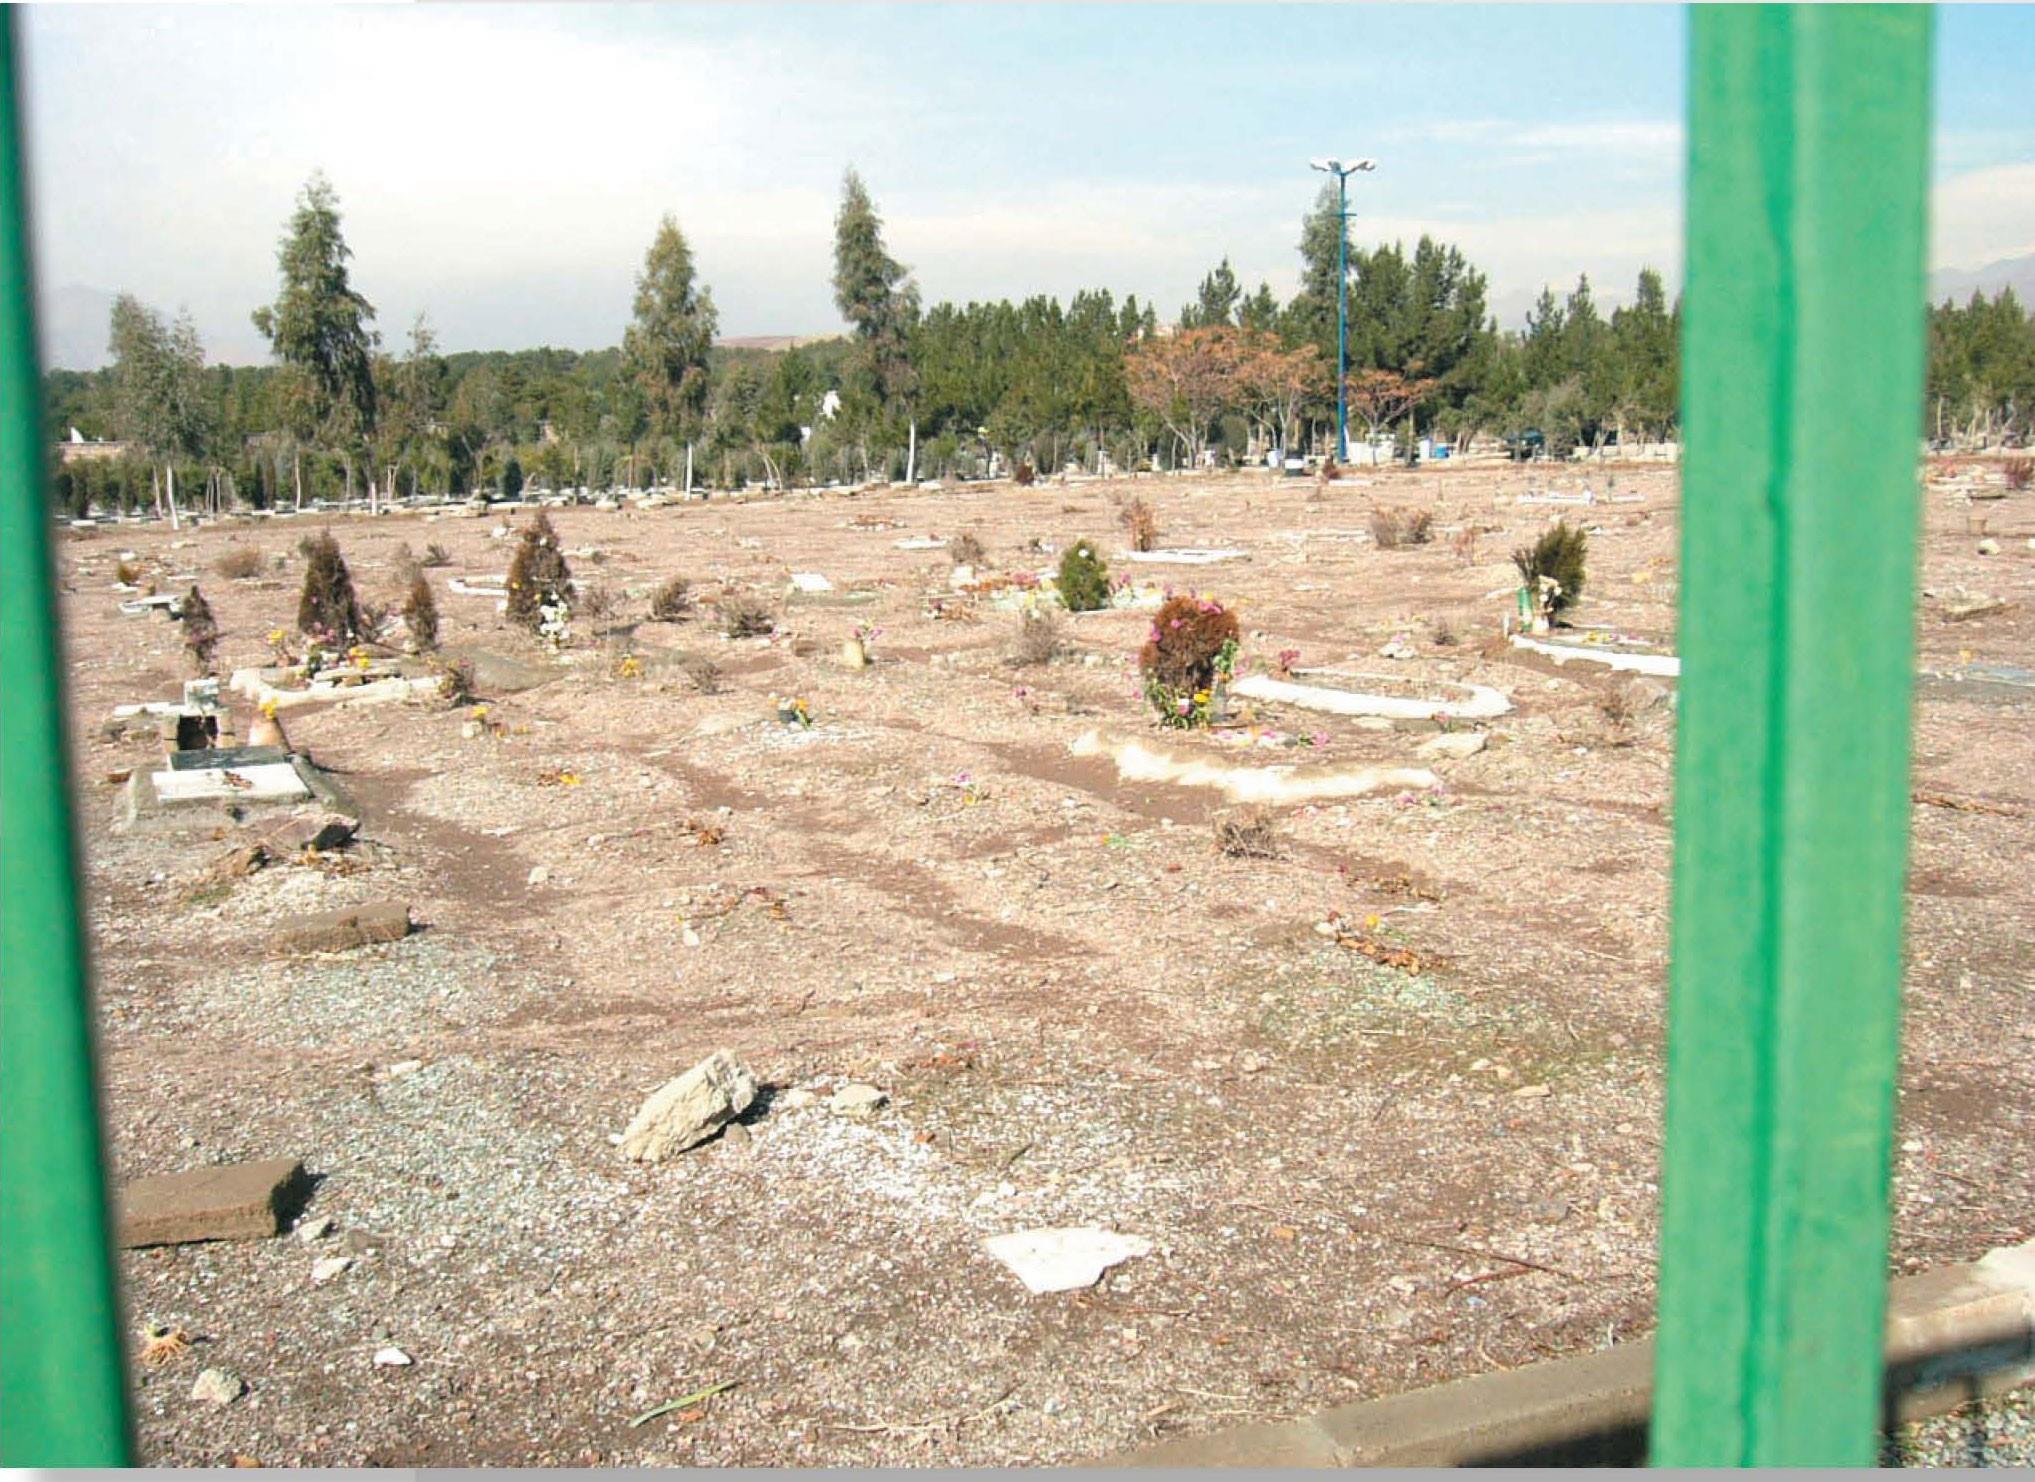  A site of a mass grave for some of the victims of the 1988 massacre of political prisoners in Iran